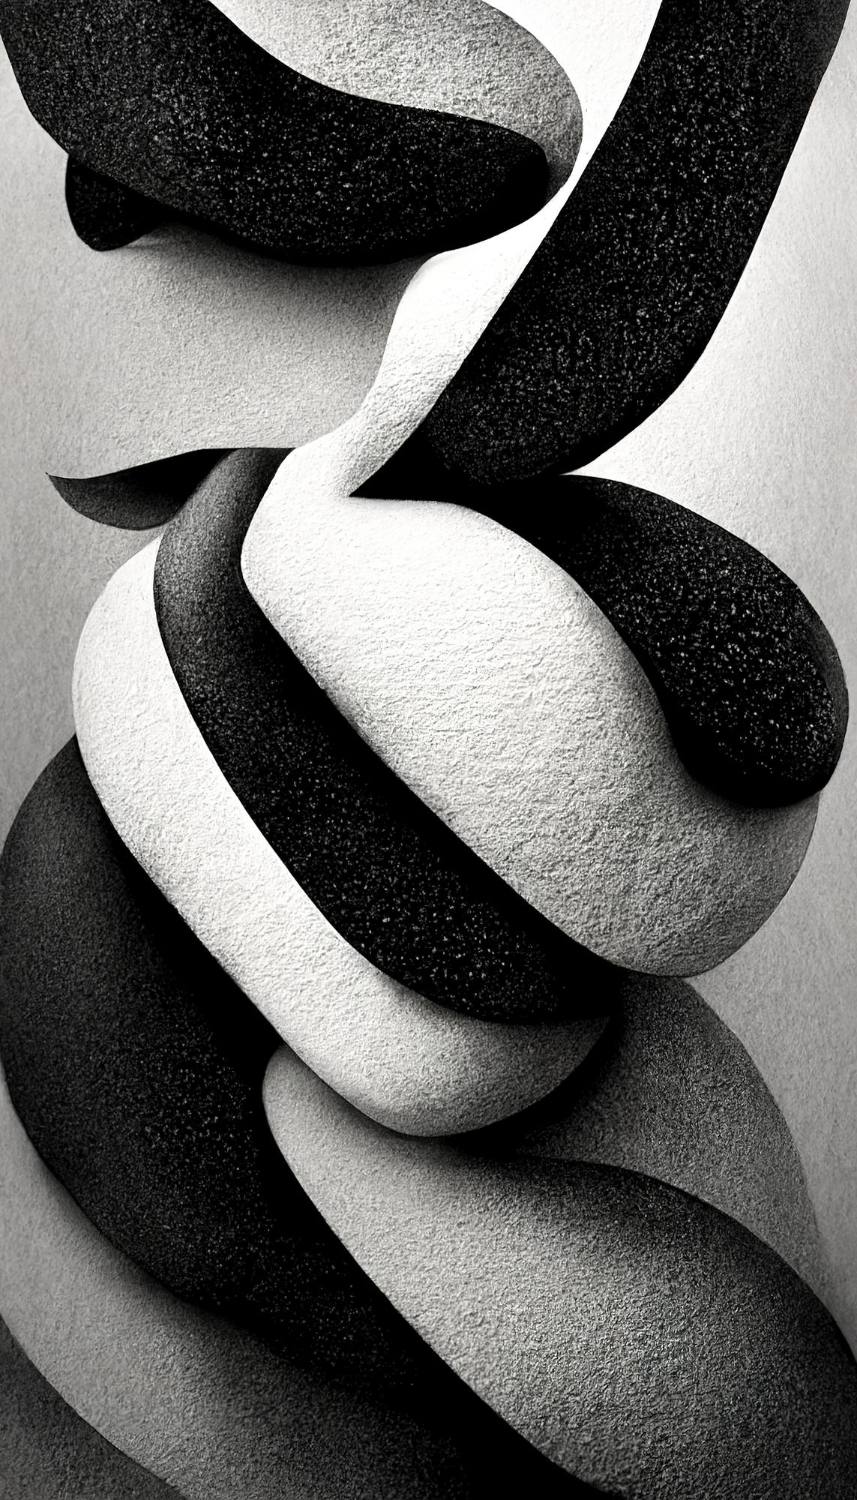 Modern Abstract Dynamic Shapes Black And White Background With Grainy Paper Texture Digital Art (2)